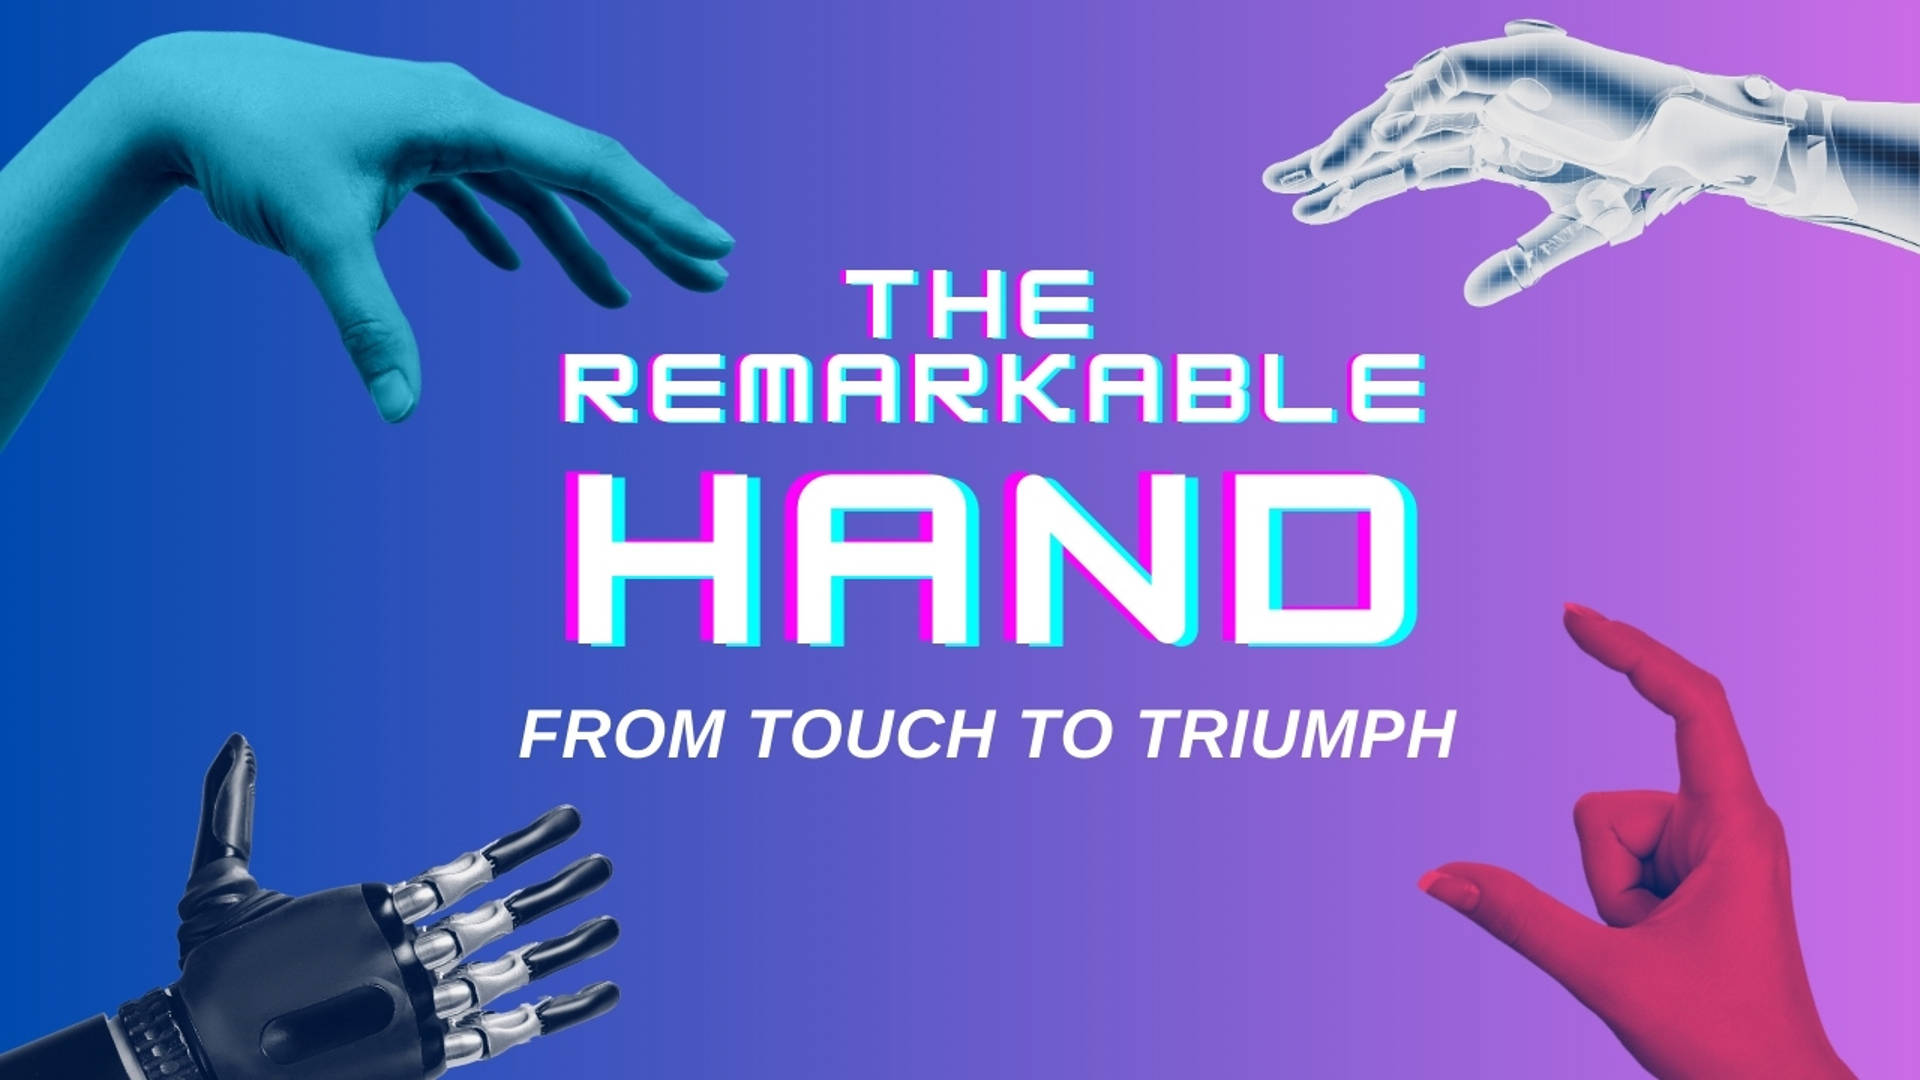 The Remarkable Hand - From Touch to Triumph